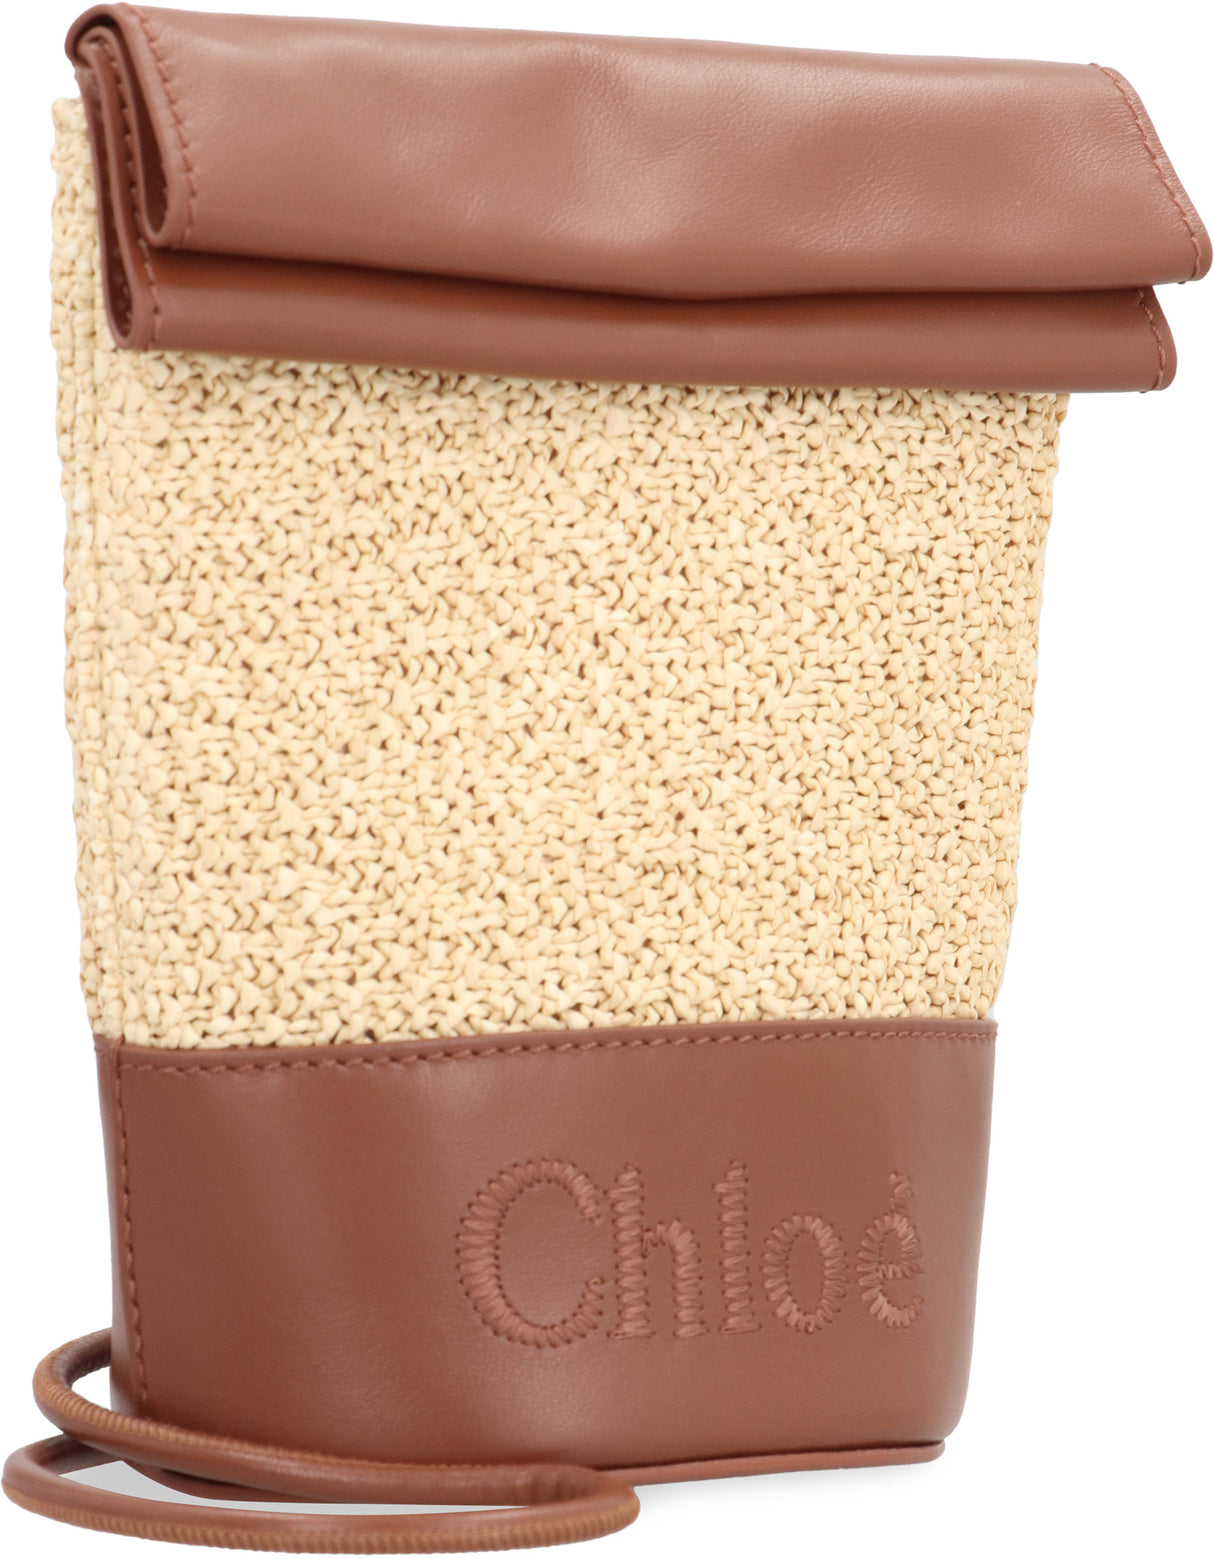 CHLOÉ Beige Woven Raffia Handbag with Leather Details and Magnetic Fastening Flap for Women